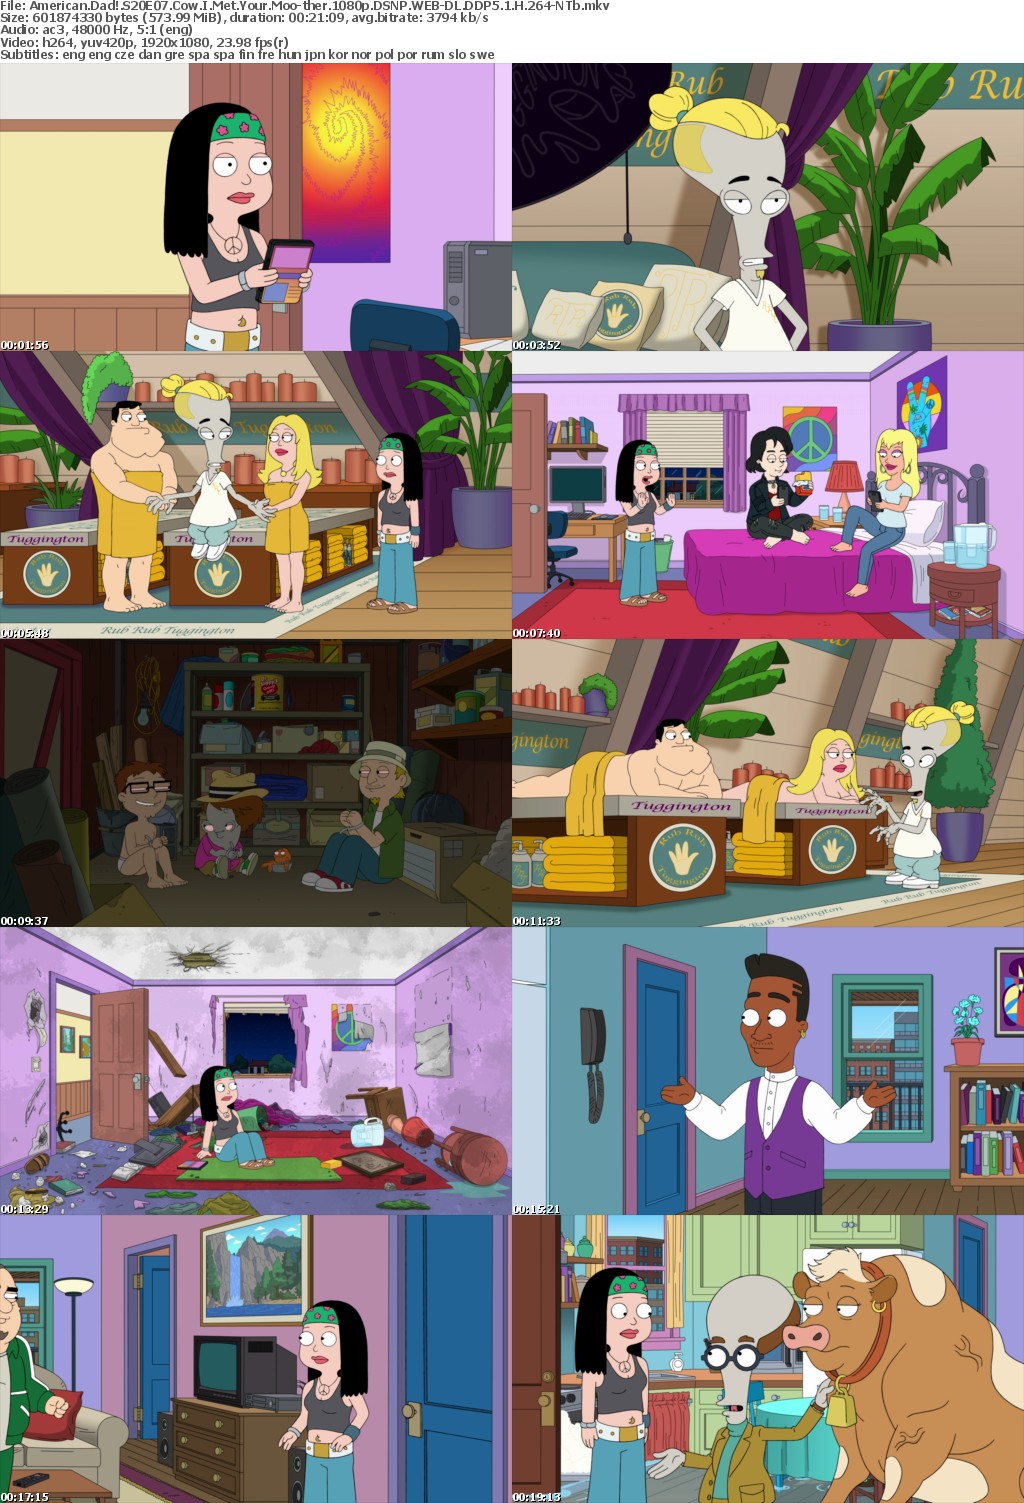 American Dad! S20E07 Cow I Met Your Moo-ther 1080p DSNP WEB-DL DDP5 1 H 264-NTb